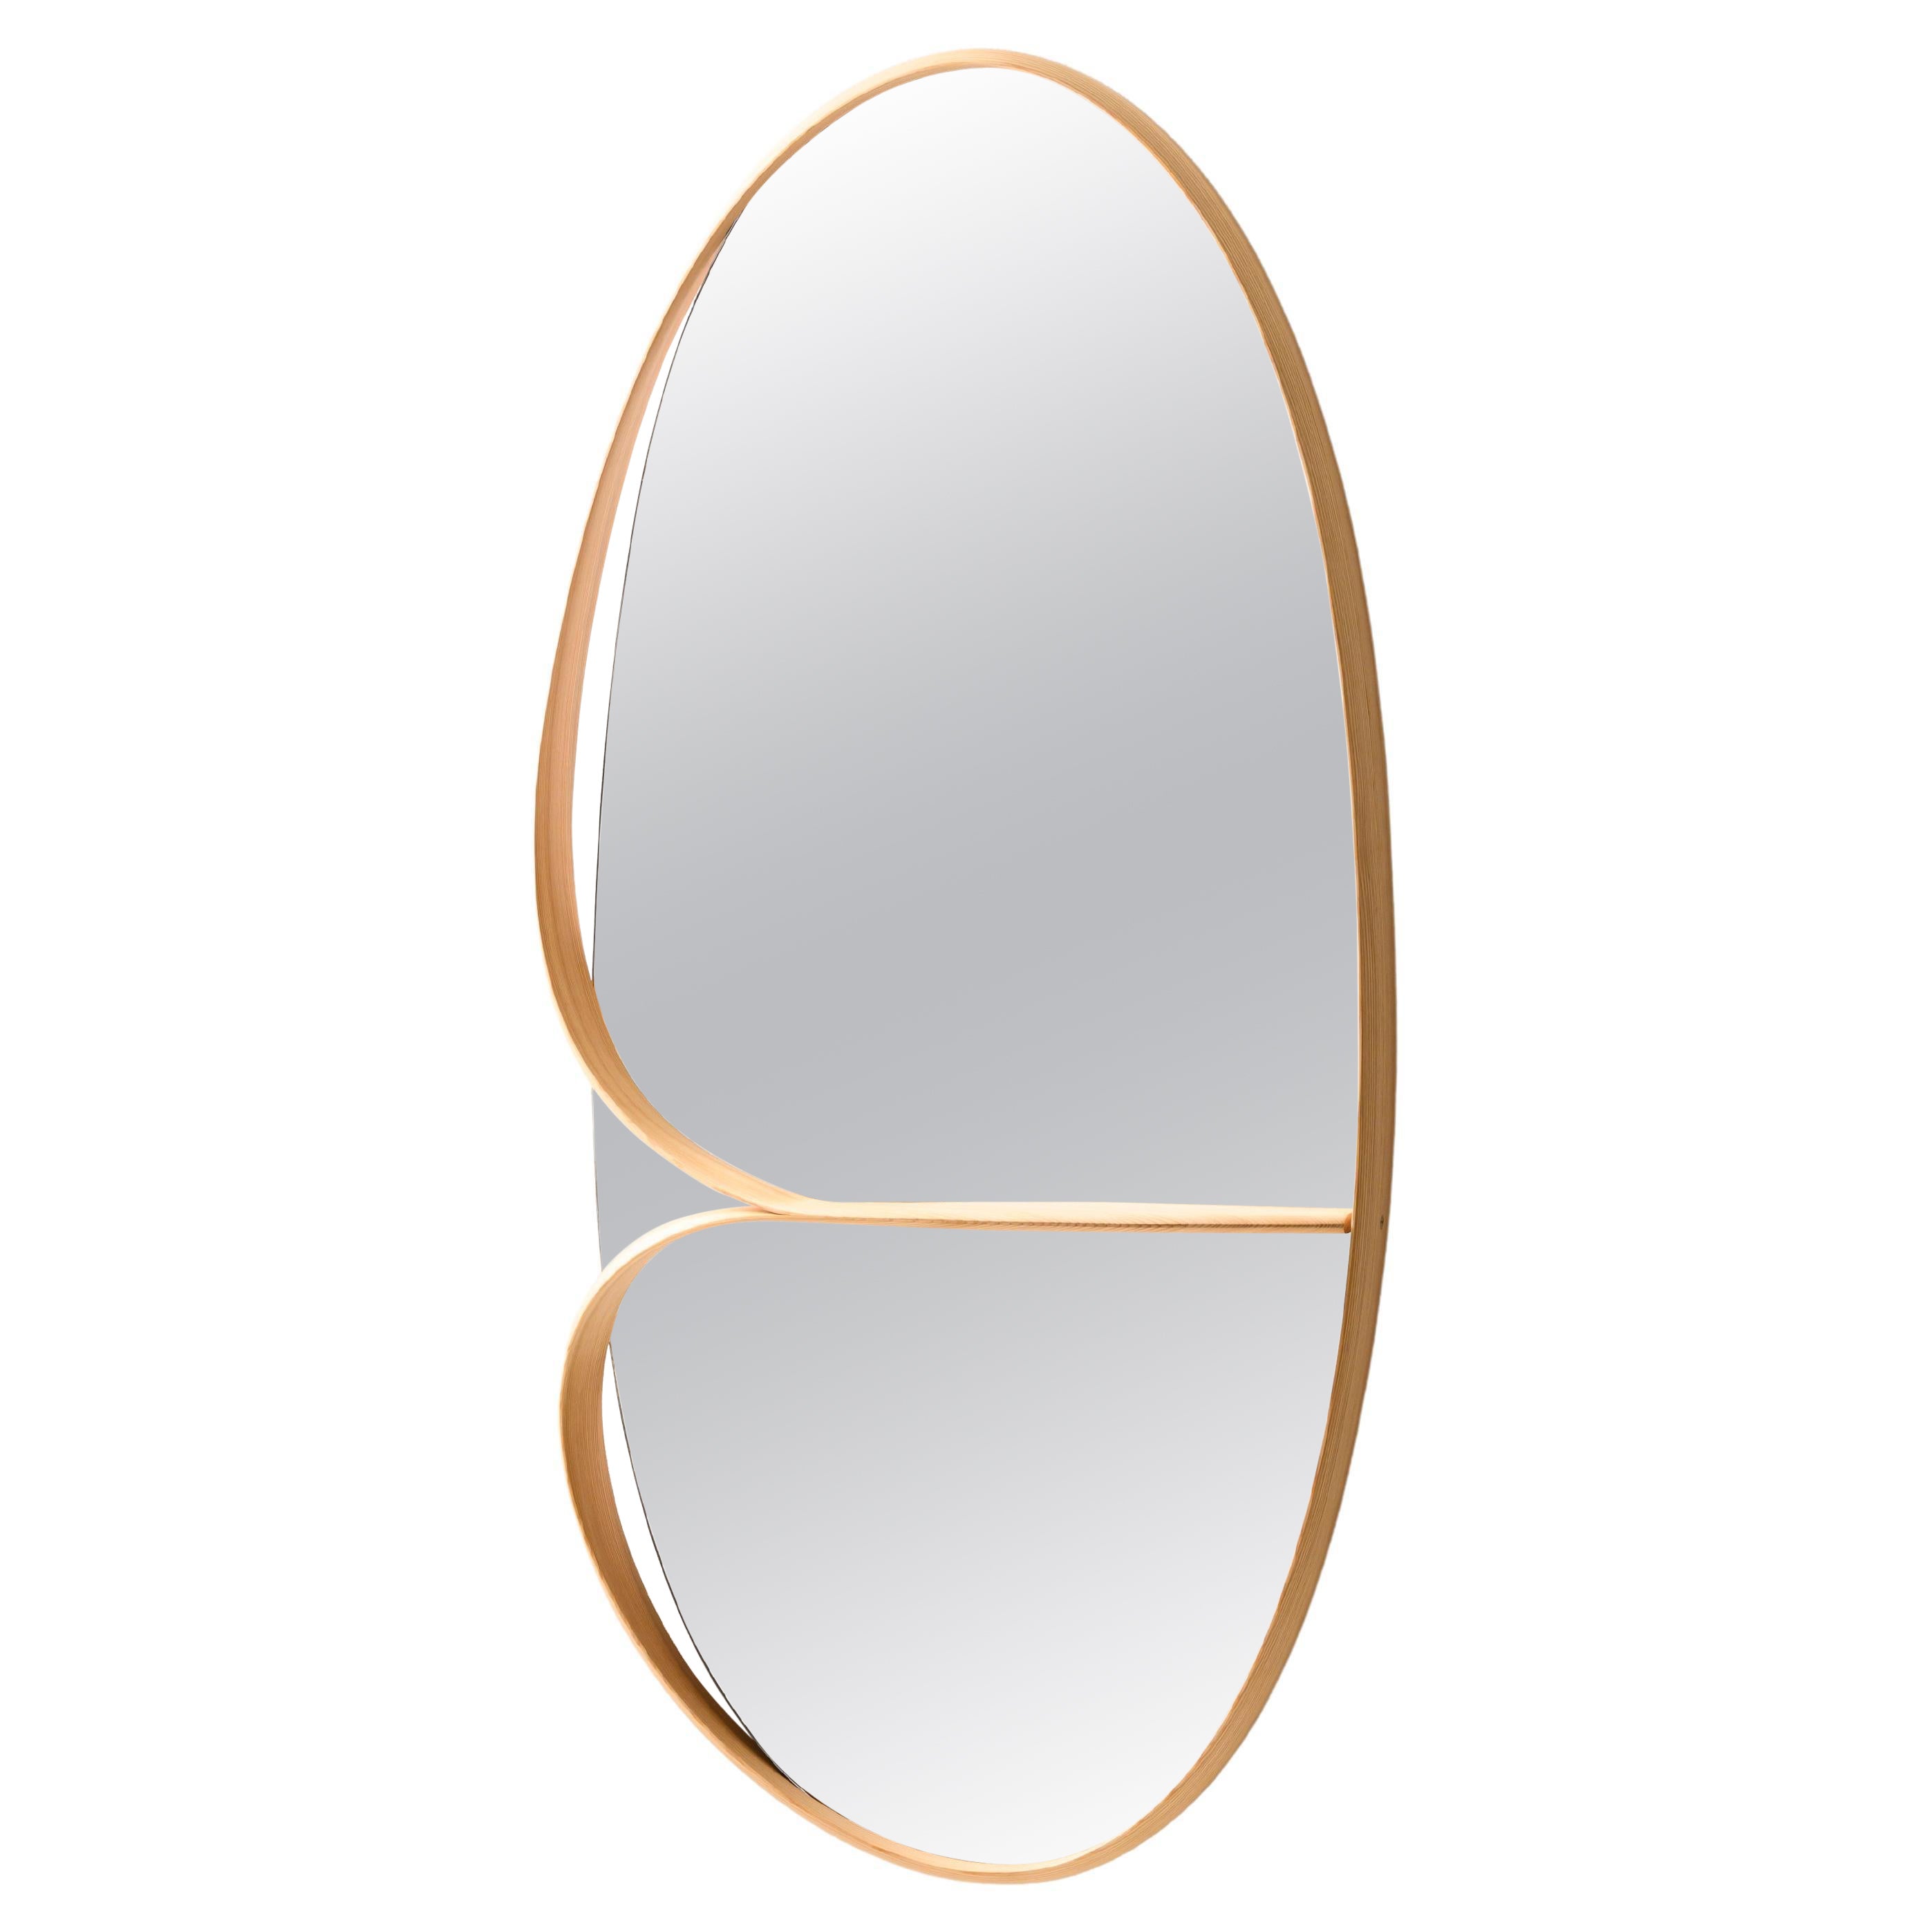 Muji Wallmirror Japanese Contemporary Style Bentwood Sculpture For Sale